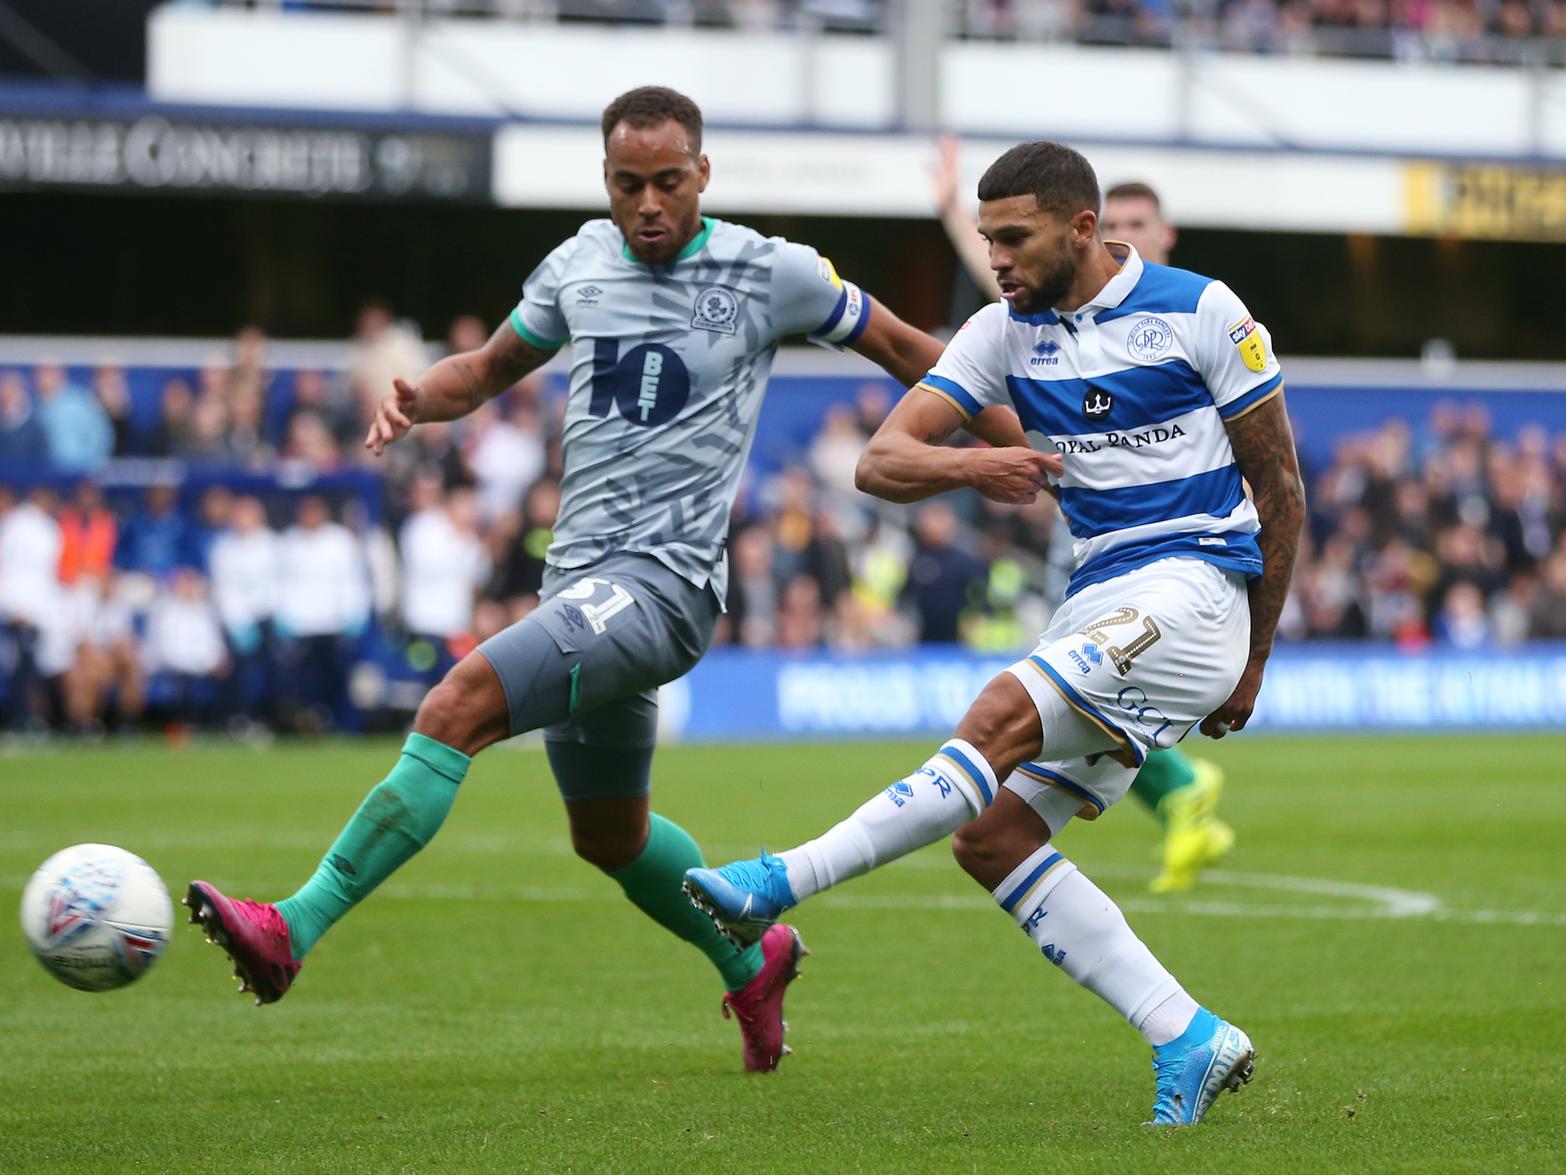 Burnley striker Nahki Wells has revealed he could be open to a permanent switch to Queens Park Rangers, after making a fine starting to his second season on loan with the Hoops. (Football League World)